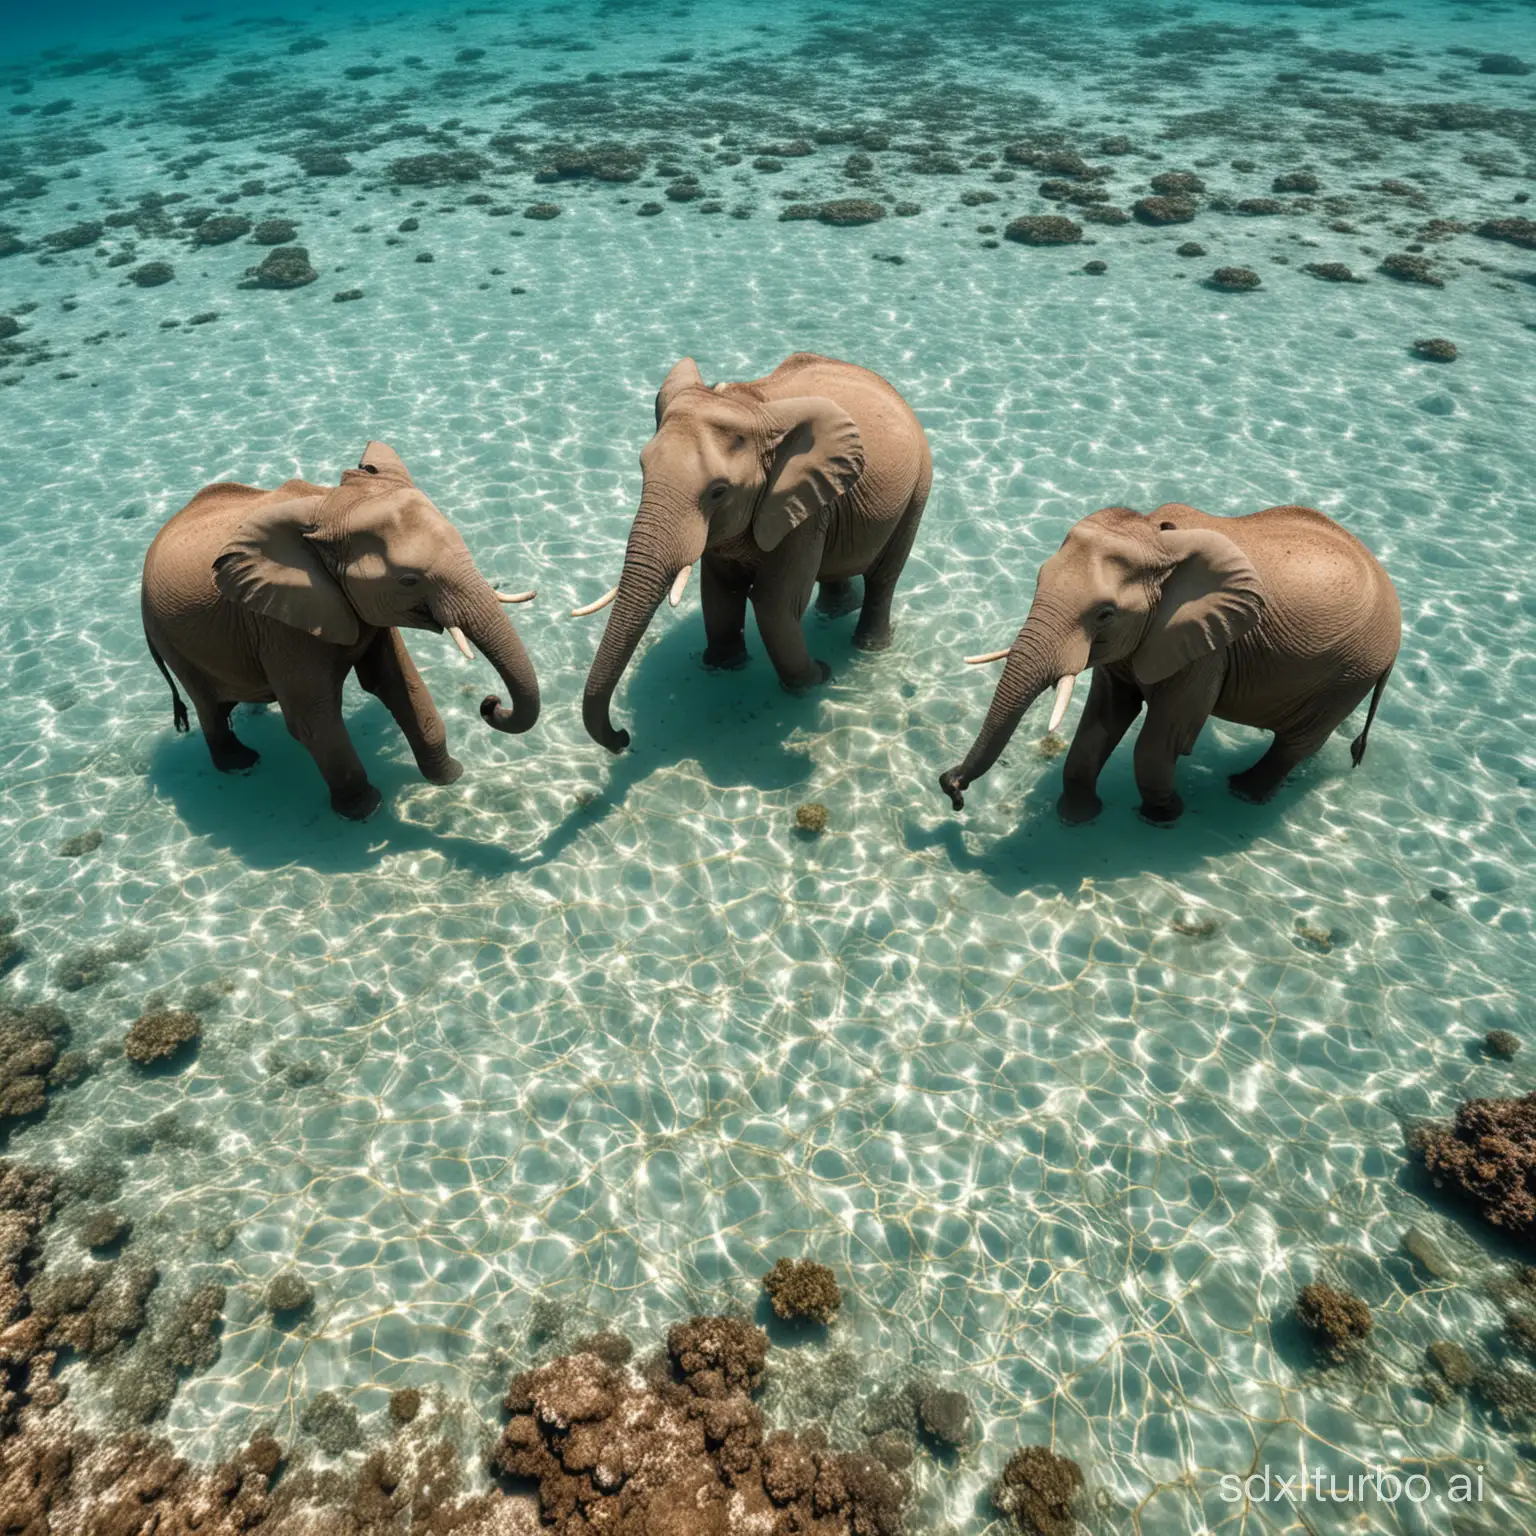 Elephants-Roaming-the-Colorful-Seabed